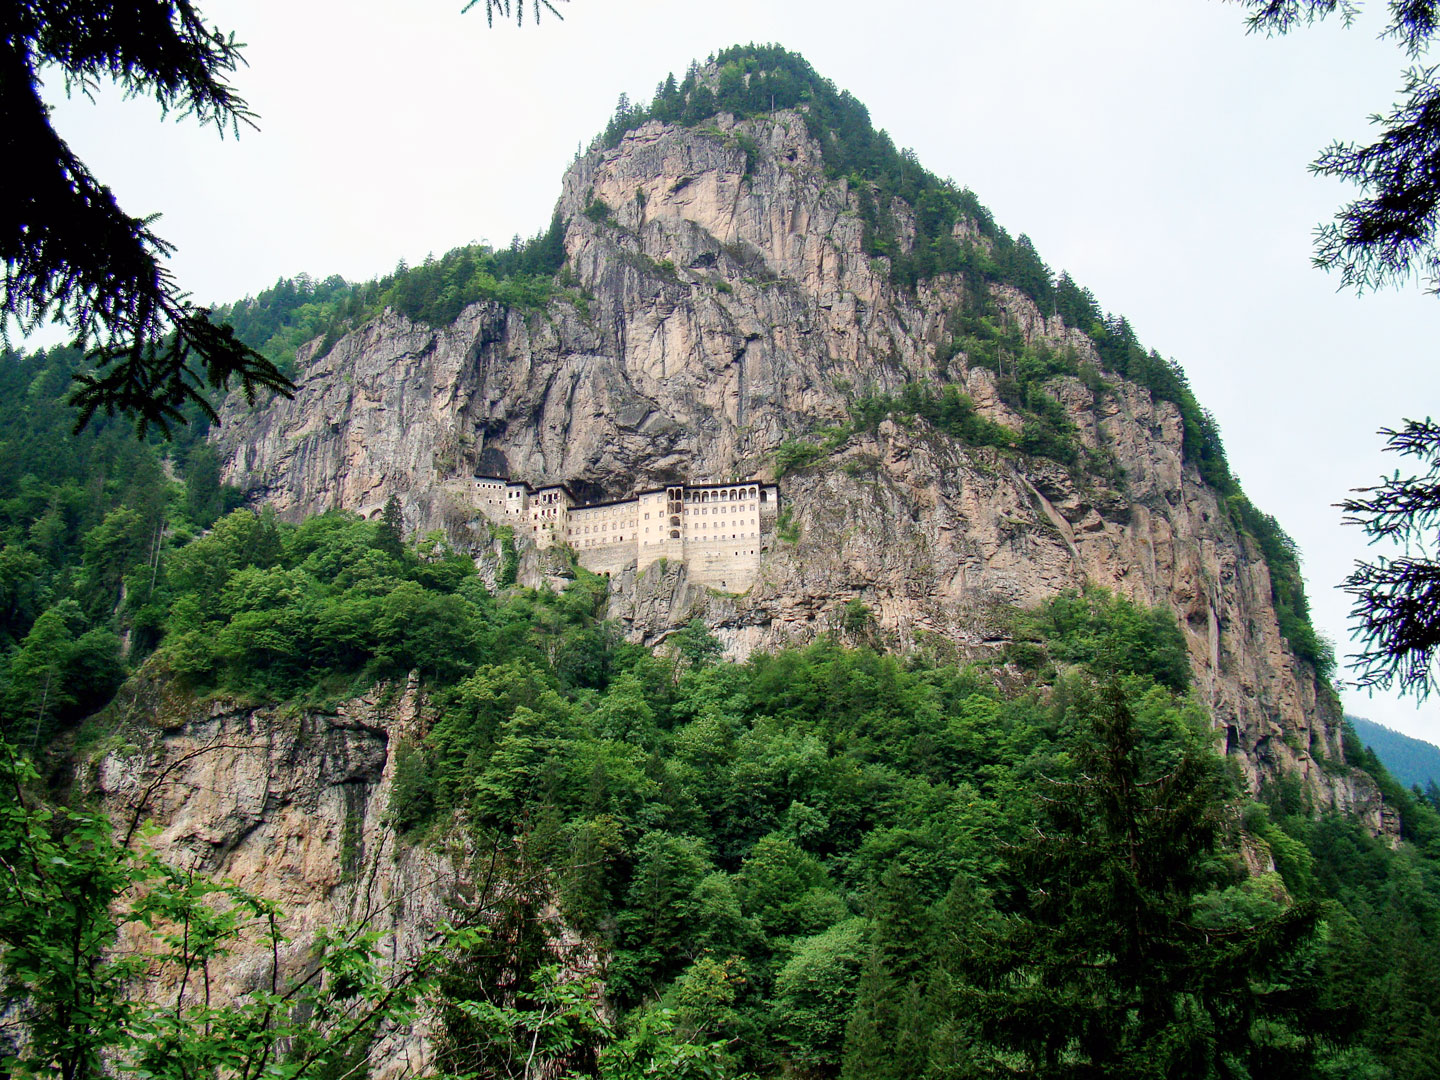 Sumela Monastery on a cliff in the eastern part of the Pontic Mountains, Turkey.